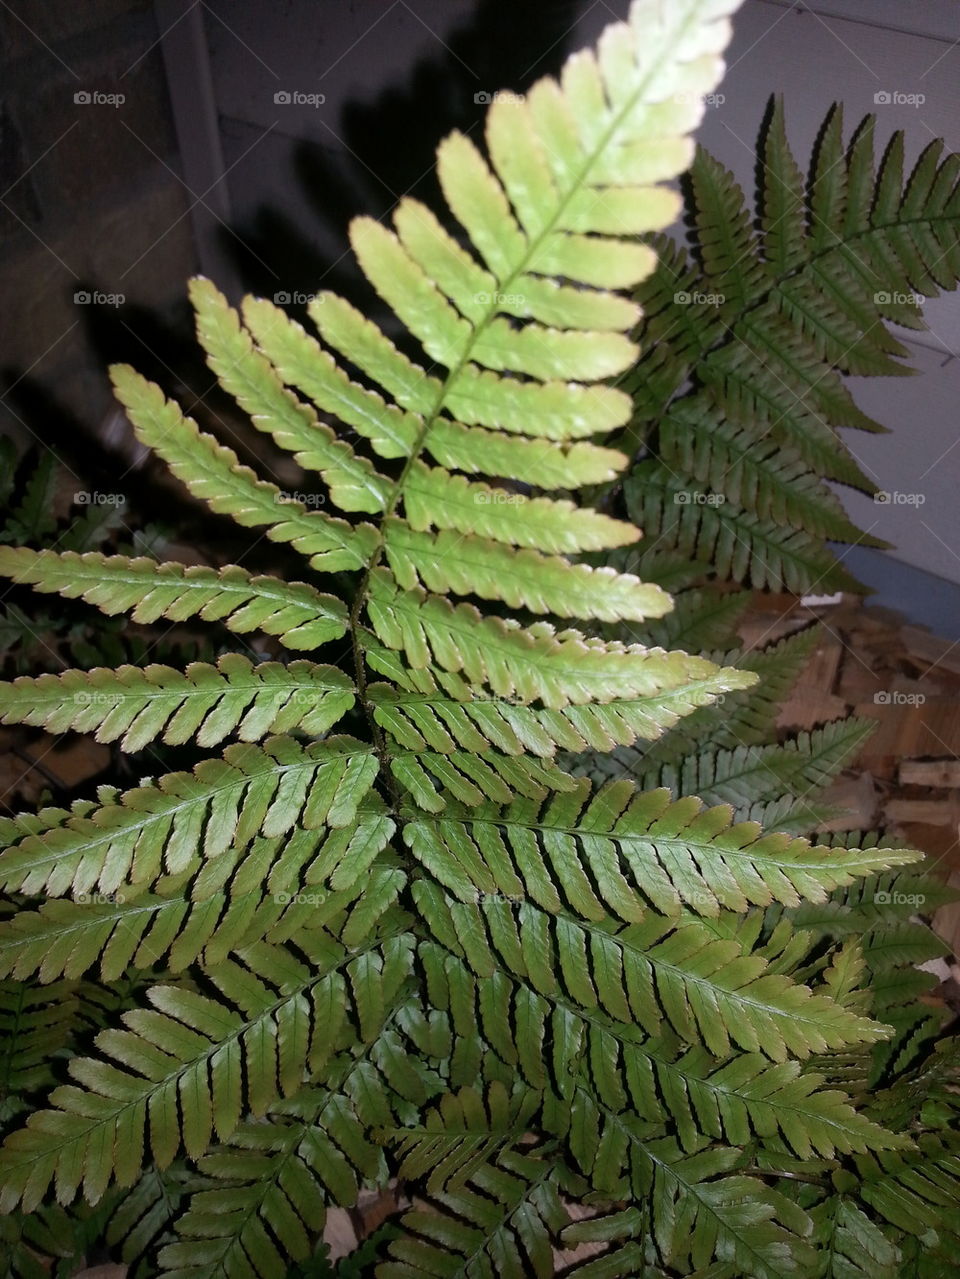 Ferns in the evening!